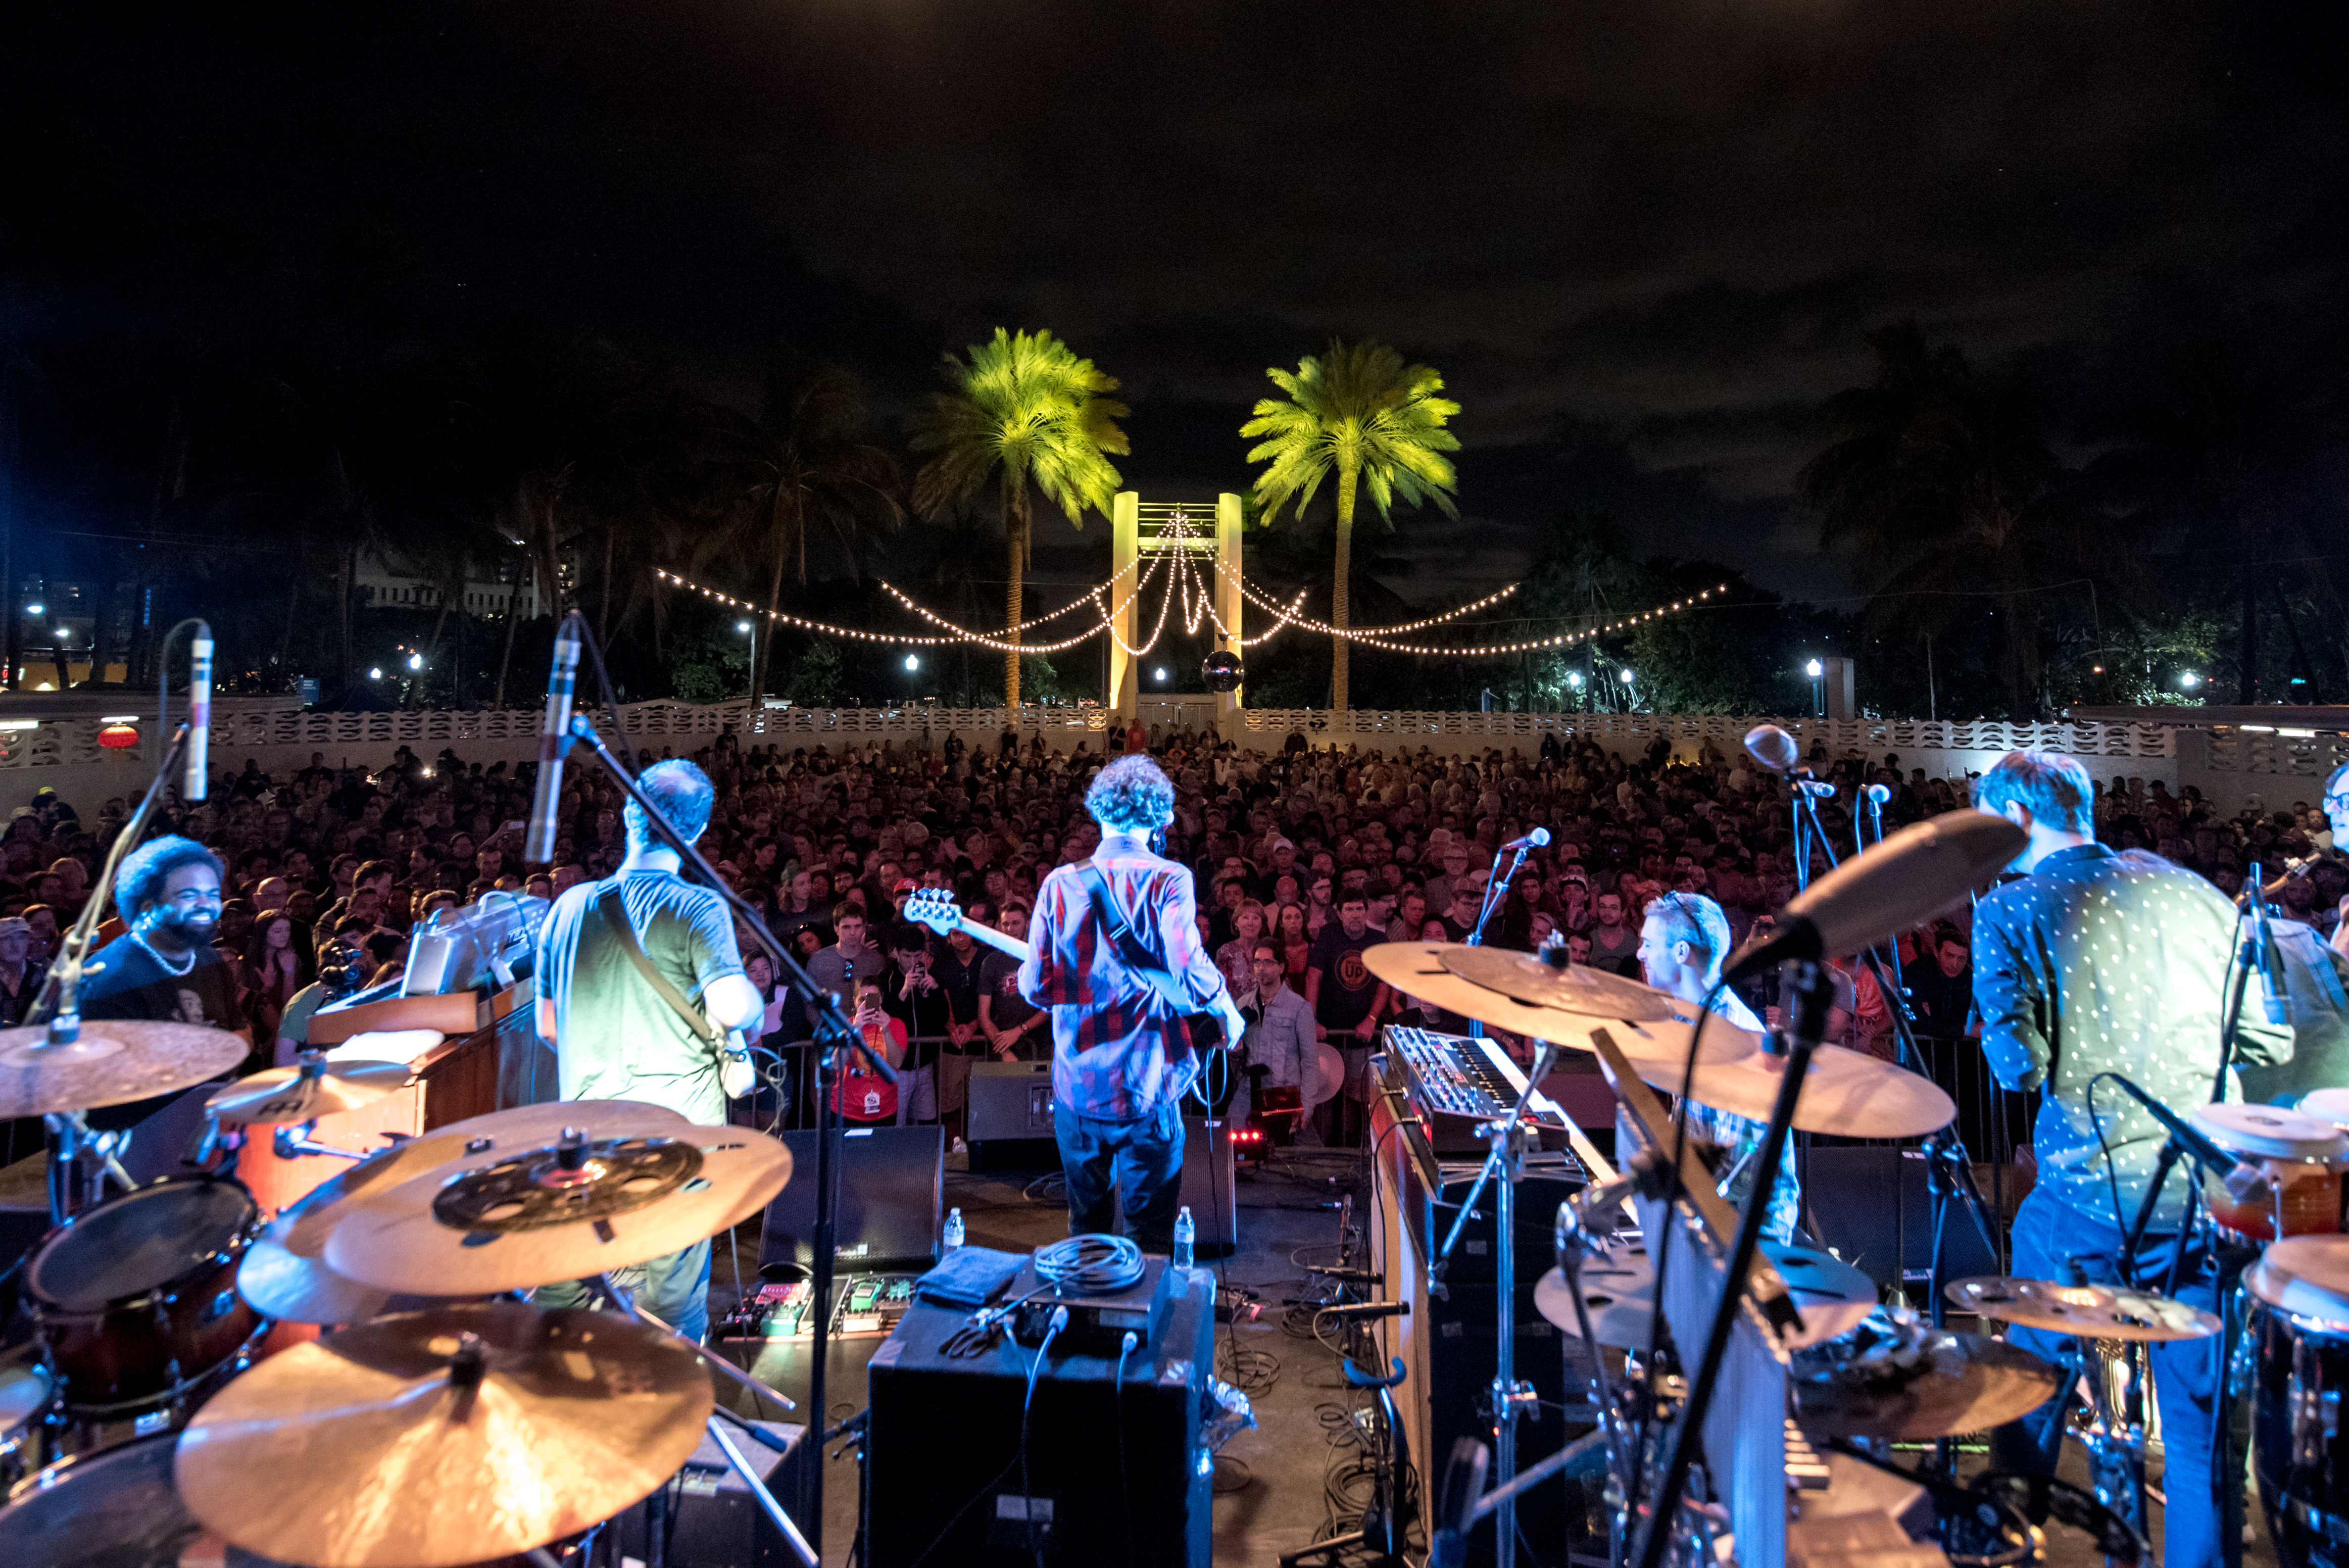 Snarky Puppy playing at GroundUP Music Festival 2018 in Miami, FL